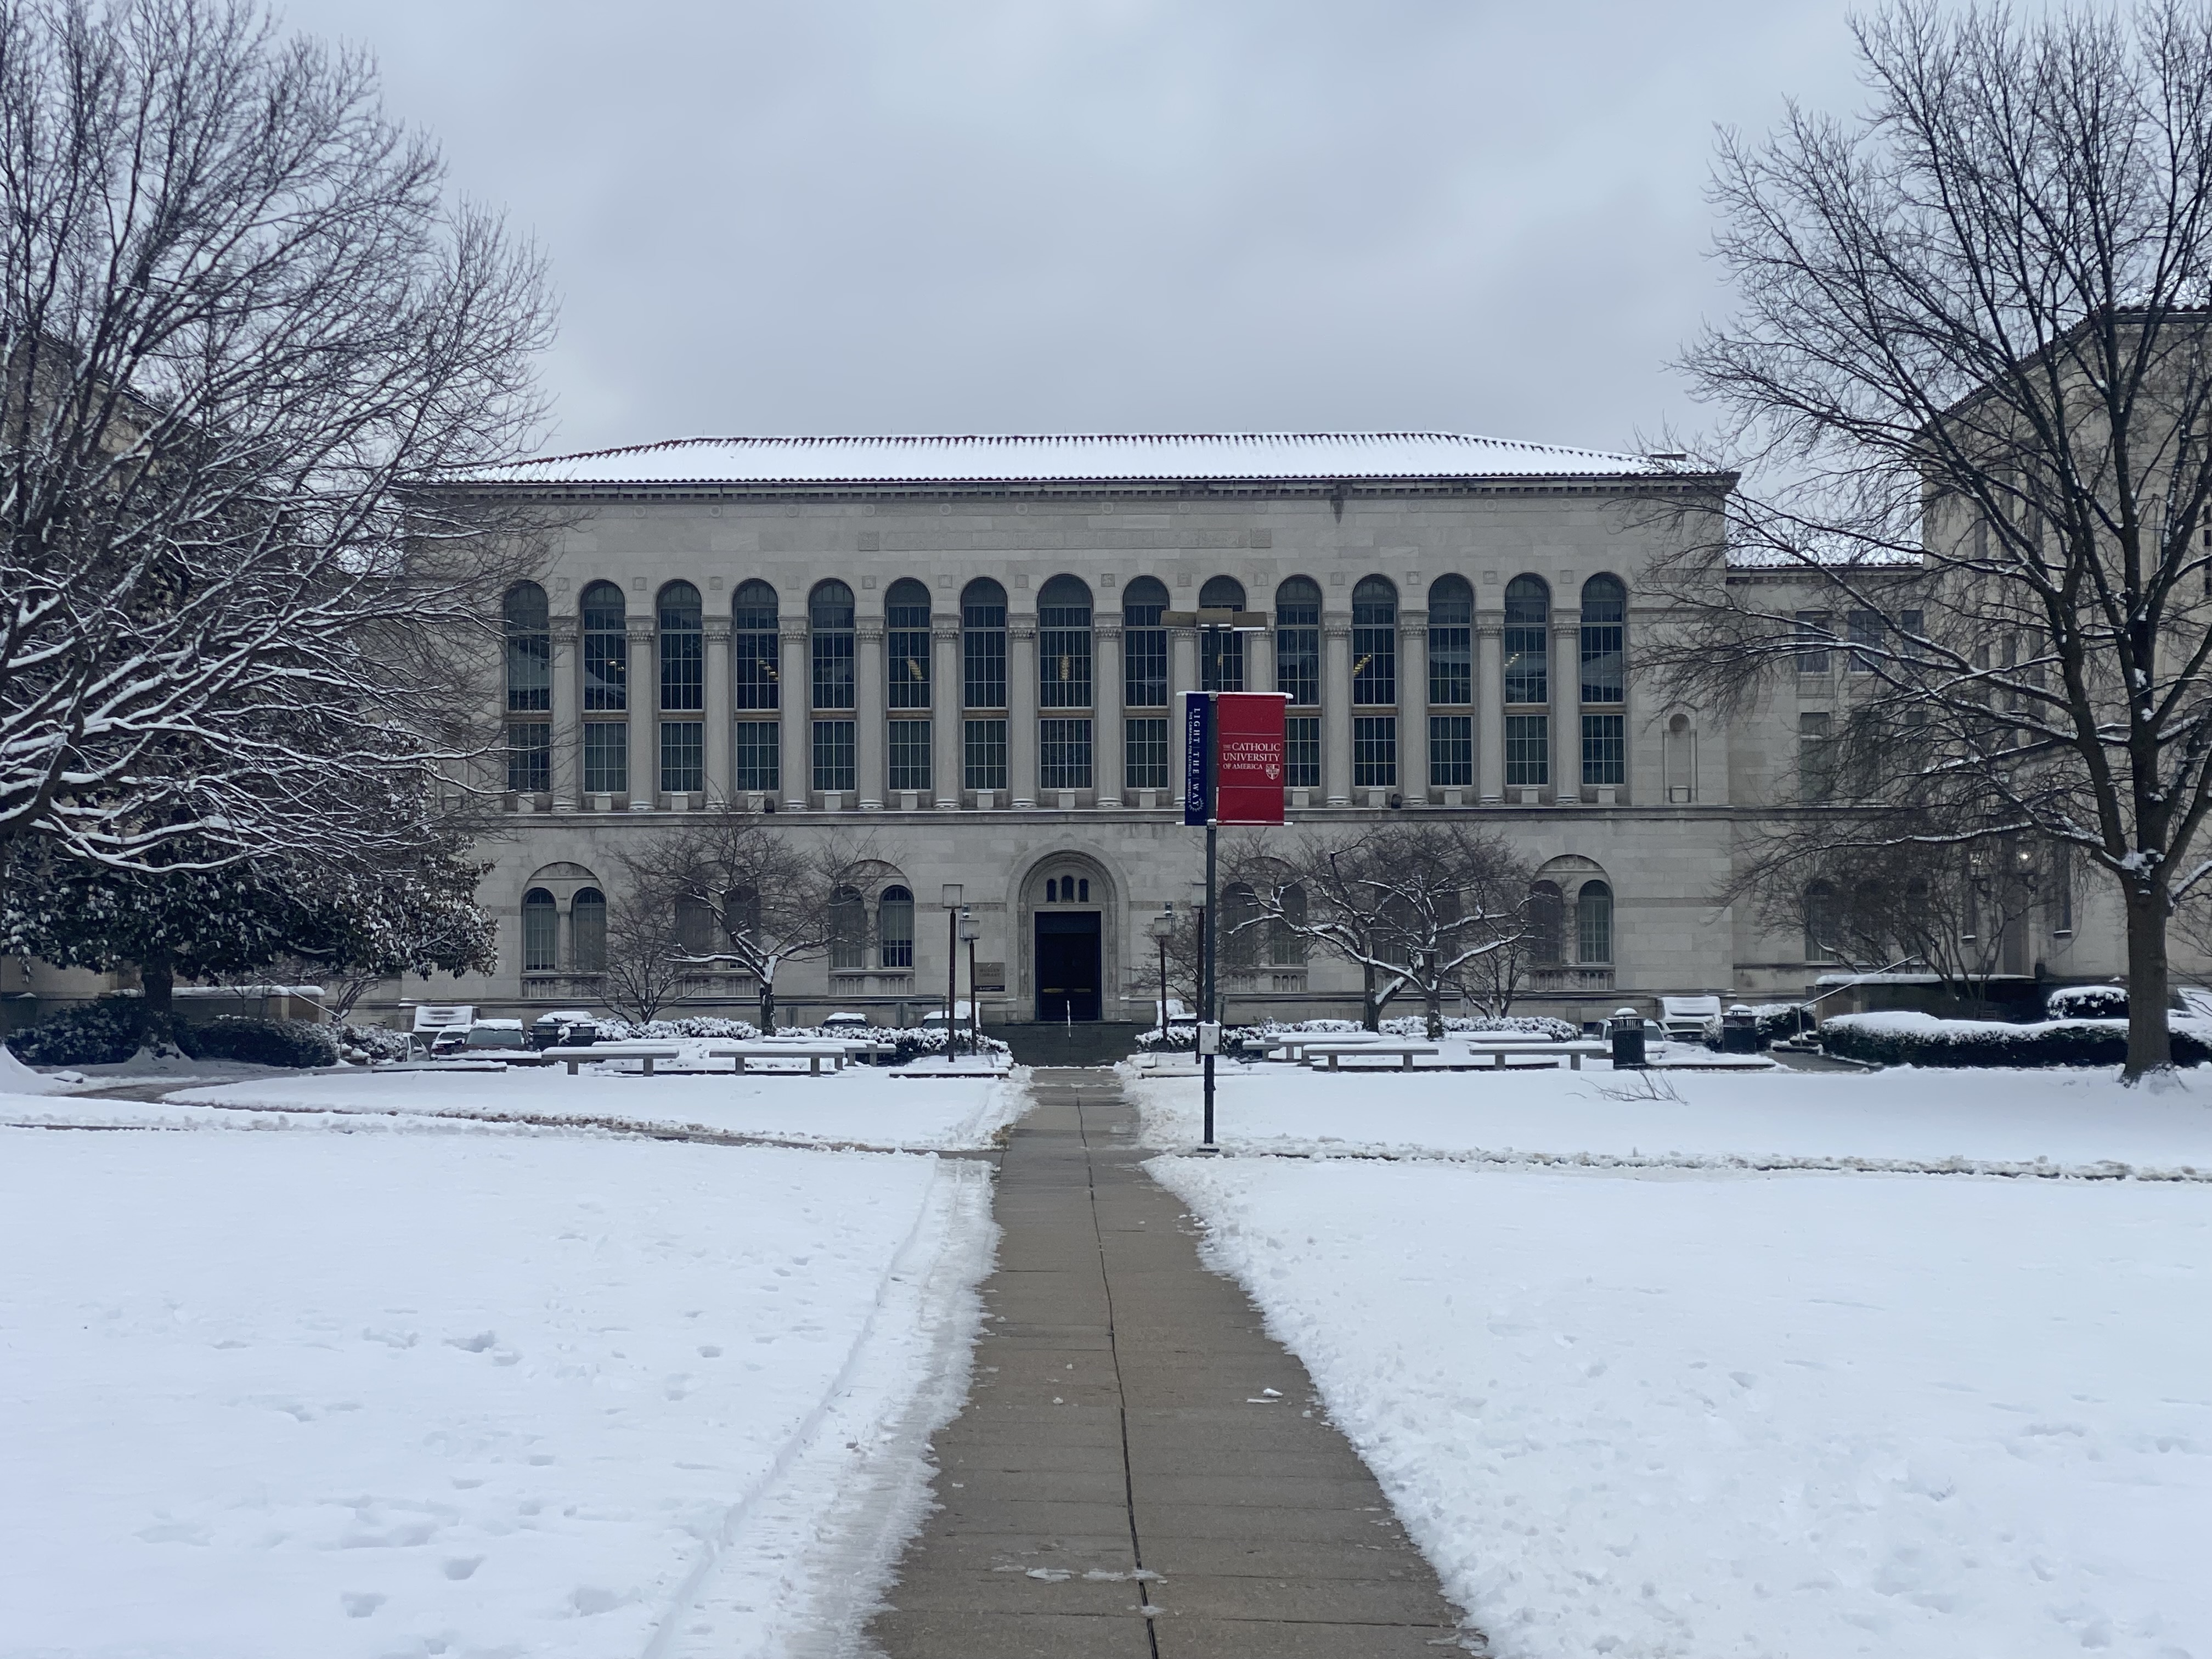 Mullen Library in the snow